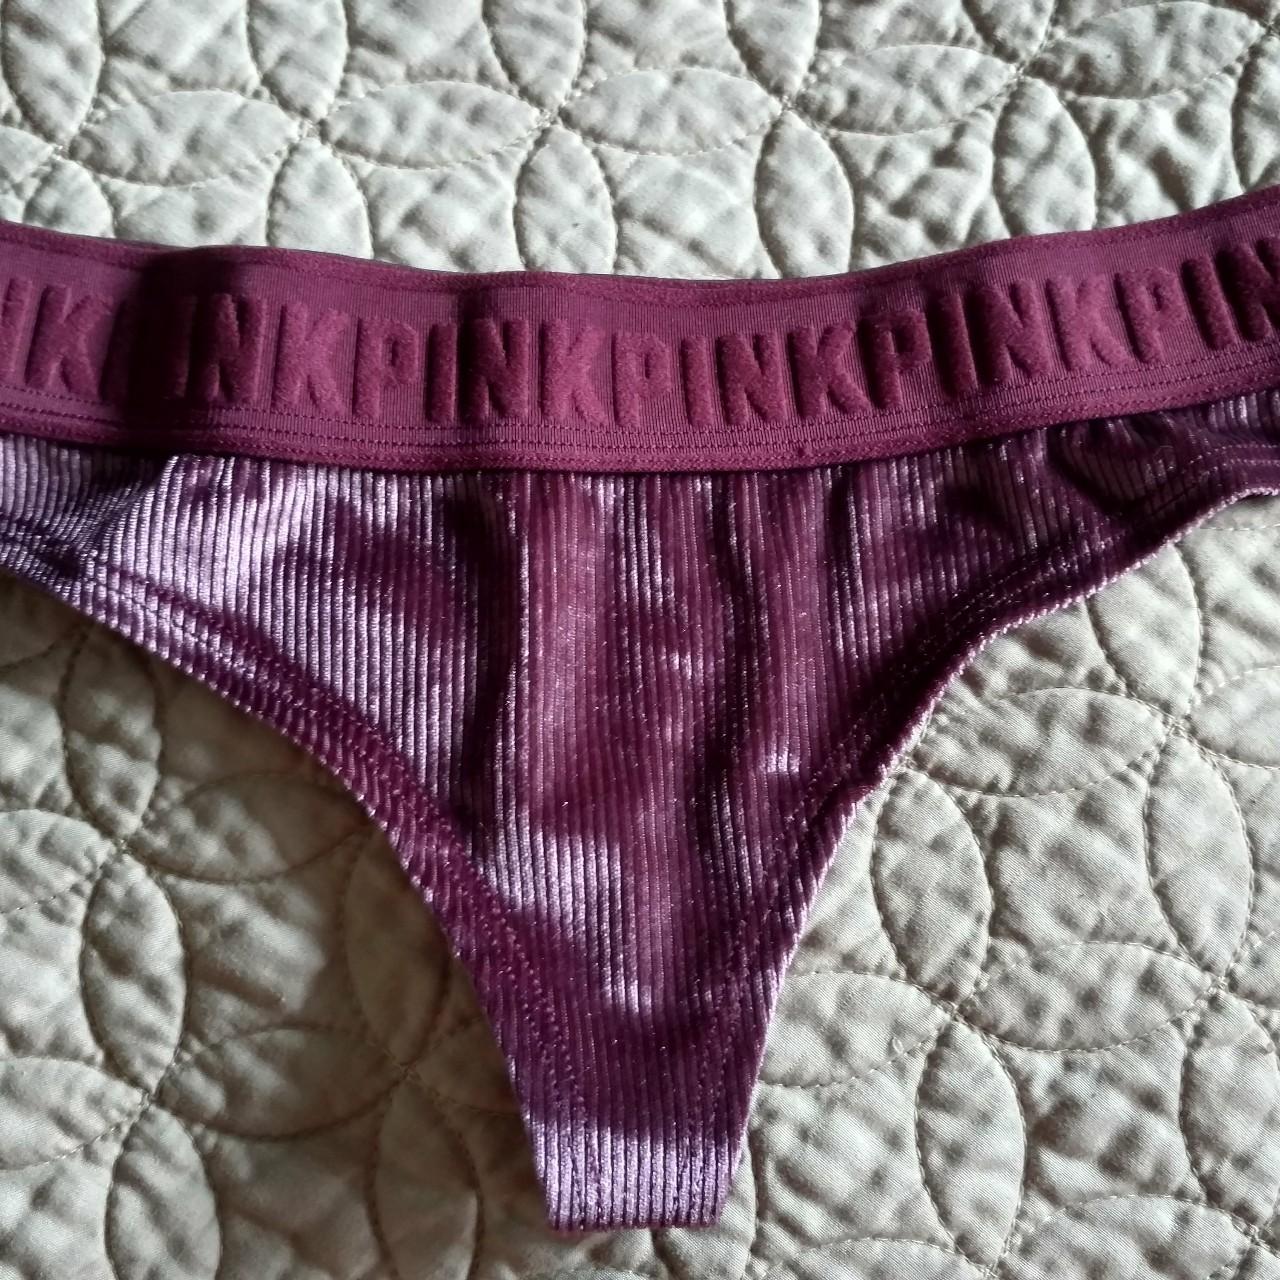 Buy Xs and Os Women's Velvet Lingerie Panty (Small, Purple) at